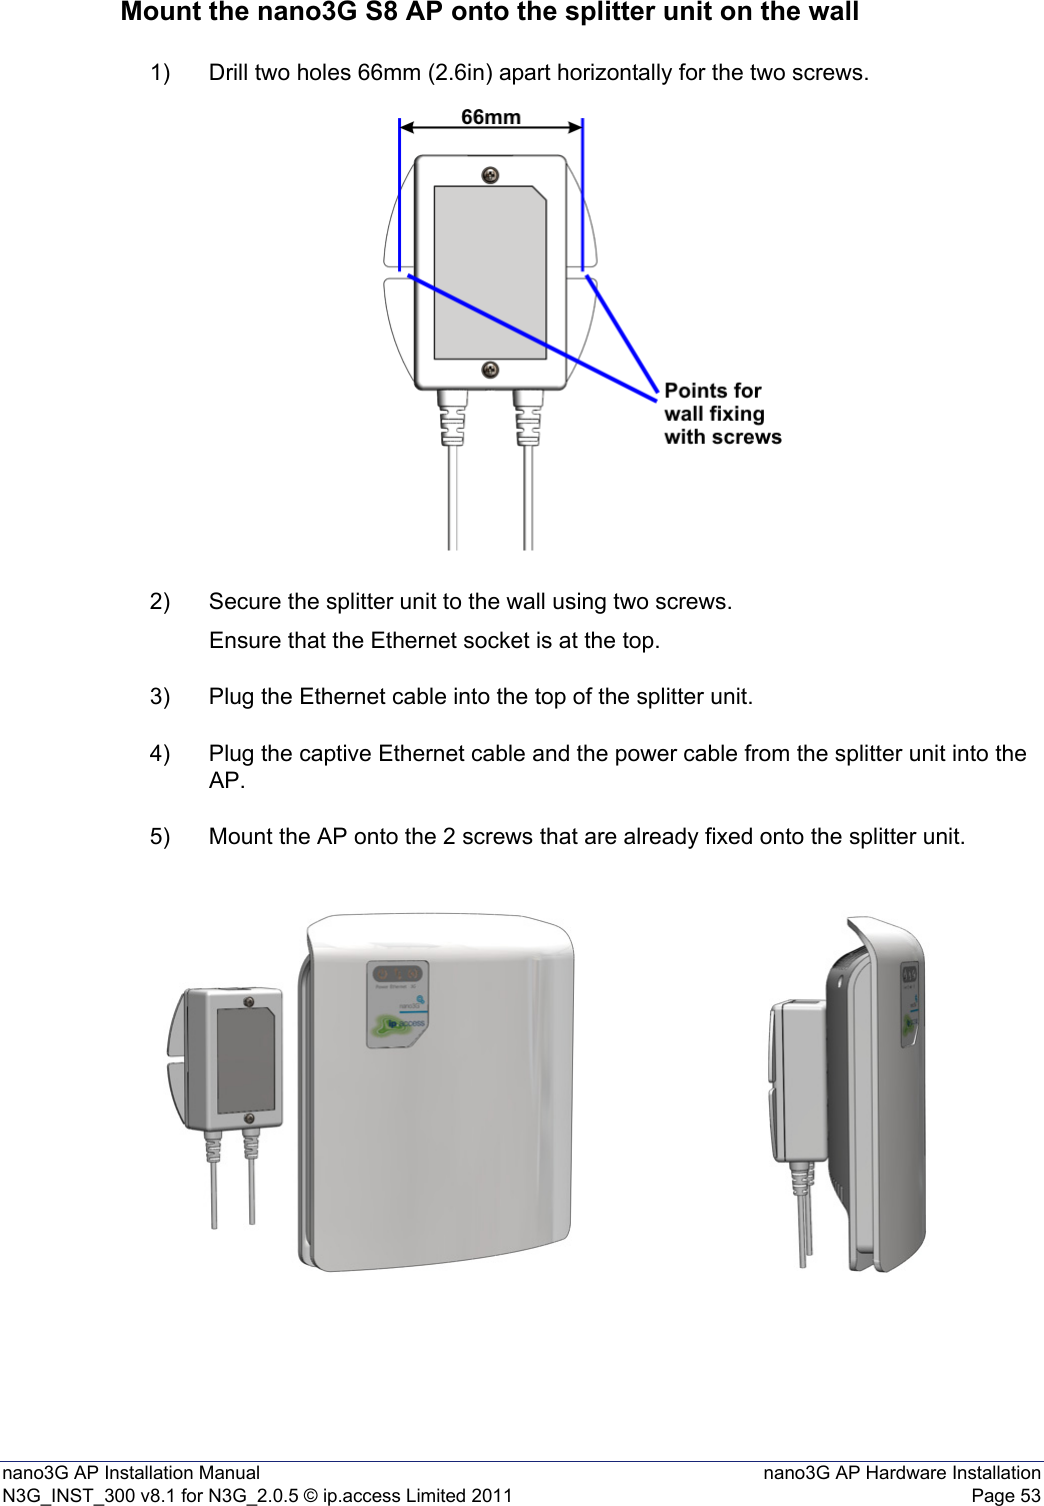 nano3G AP Installation Manual nano3G AP Hardware InstallationN3G_INST_300 v8.1 for N3G_2.0.5 © ip.access Limited 2011 Page 53Mount the nano3G S8 AP onto the splitter unit on the wall1) Drill two holes 66mm (2.6in) apart horizontally for the two screws.2) Secure the splitter unit to the wall using two screws.Ensure that the Ethernet socket is at the top.3) Plug the Ethernet cable into the top of the splitter unit.4) Plug the captive Ethernet cable and the power cable from the splitter unit into the AP.5) Mount the AP onto the 2 screws that are already fixed onto the splitter unit.